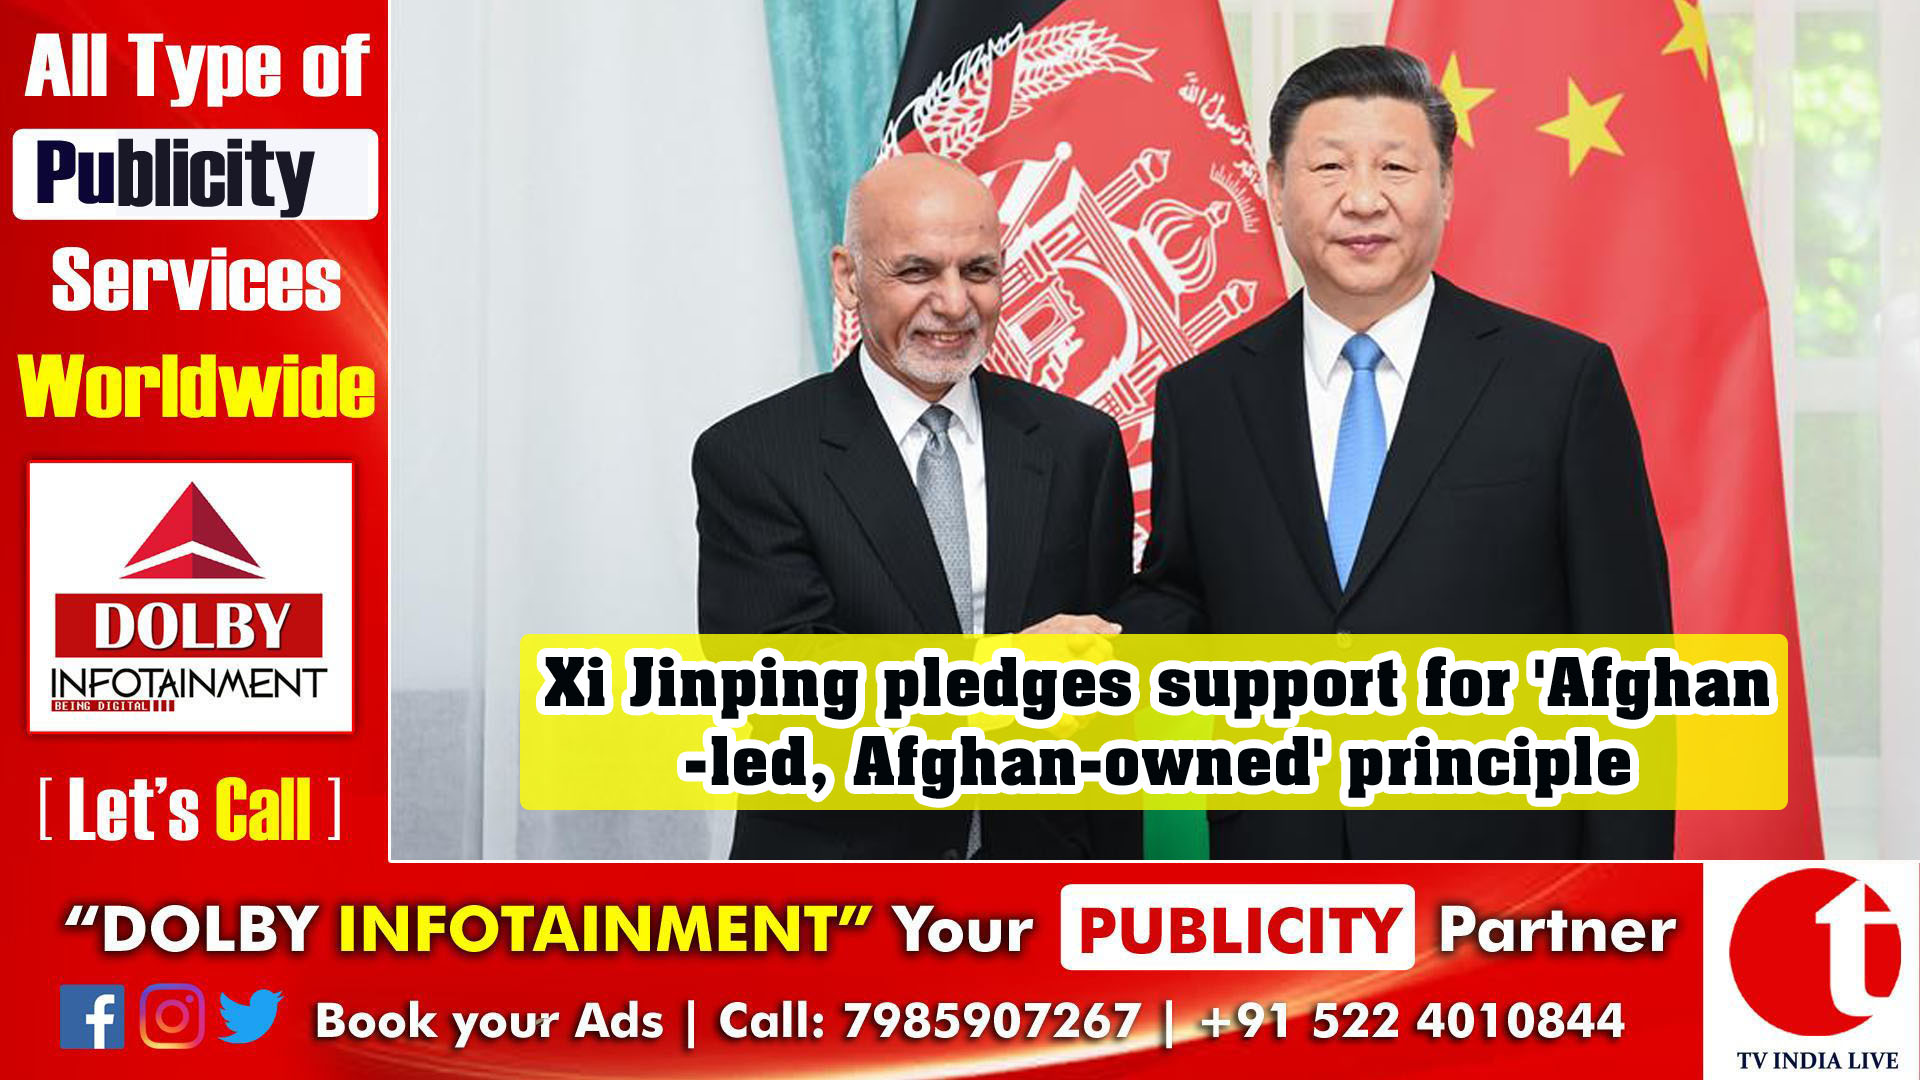 Xi Jinping pledges support for 'Afghan-led, Afghan-owned' principle